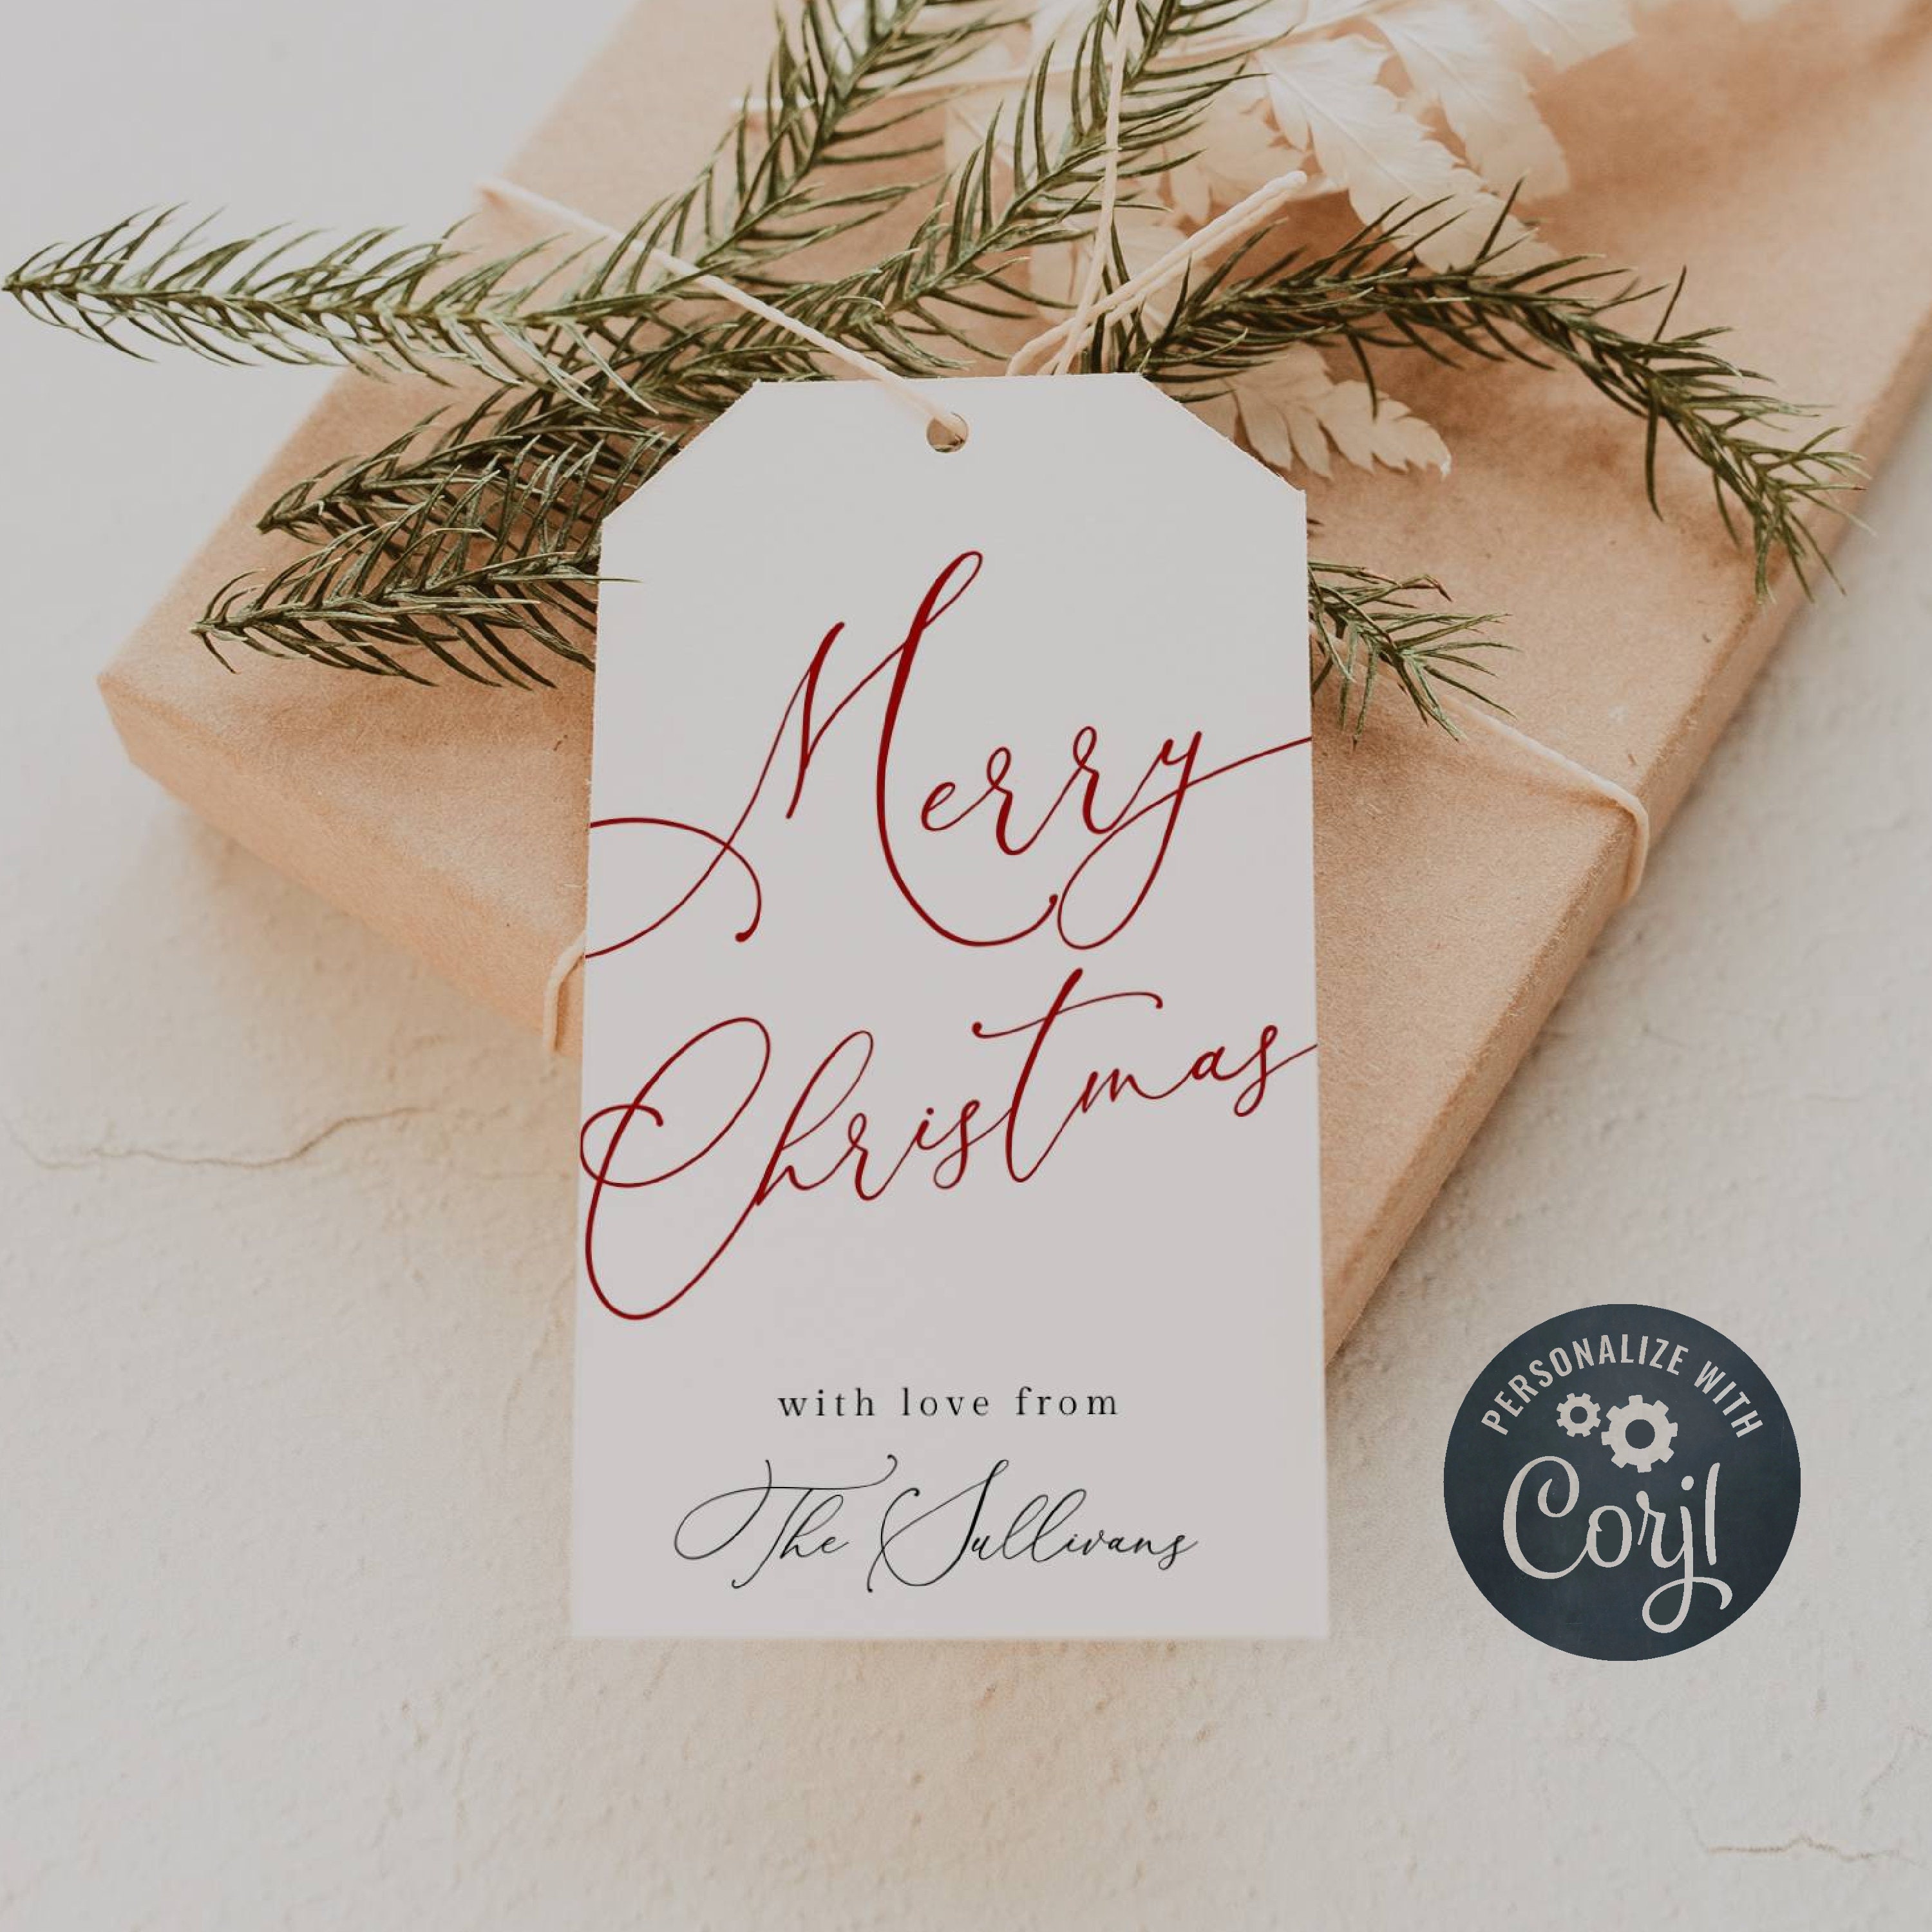 Personalized Christmas Gift Tags with Preppy, Classic Designs